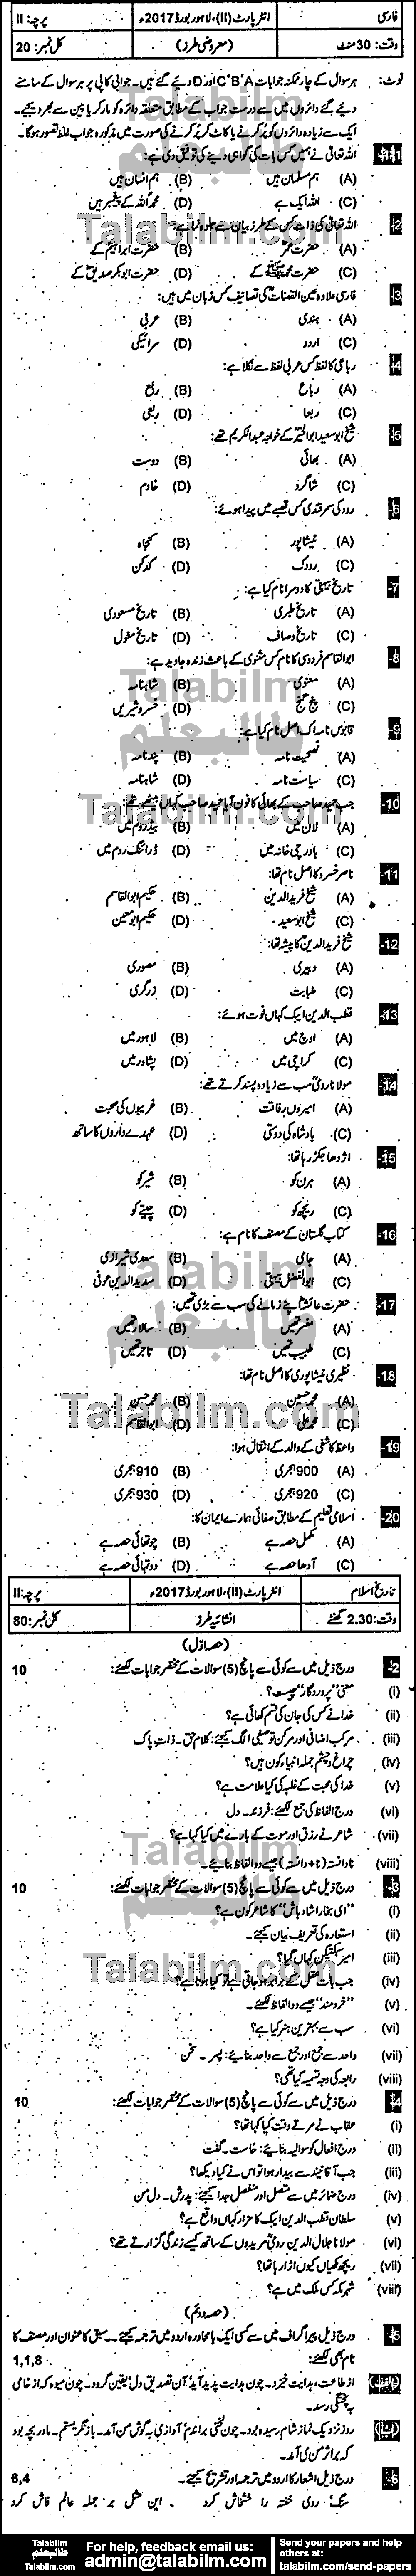 Persian 0 past paper for Group-II 2017